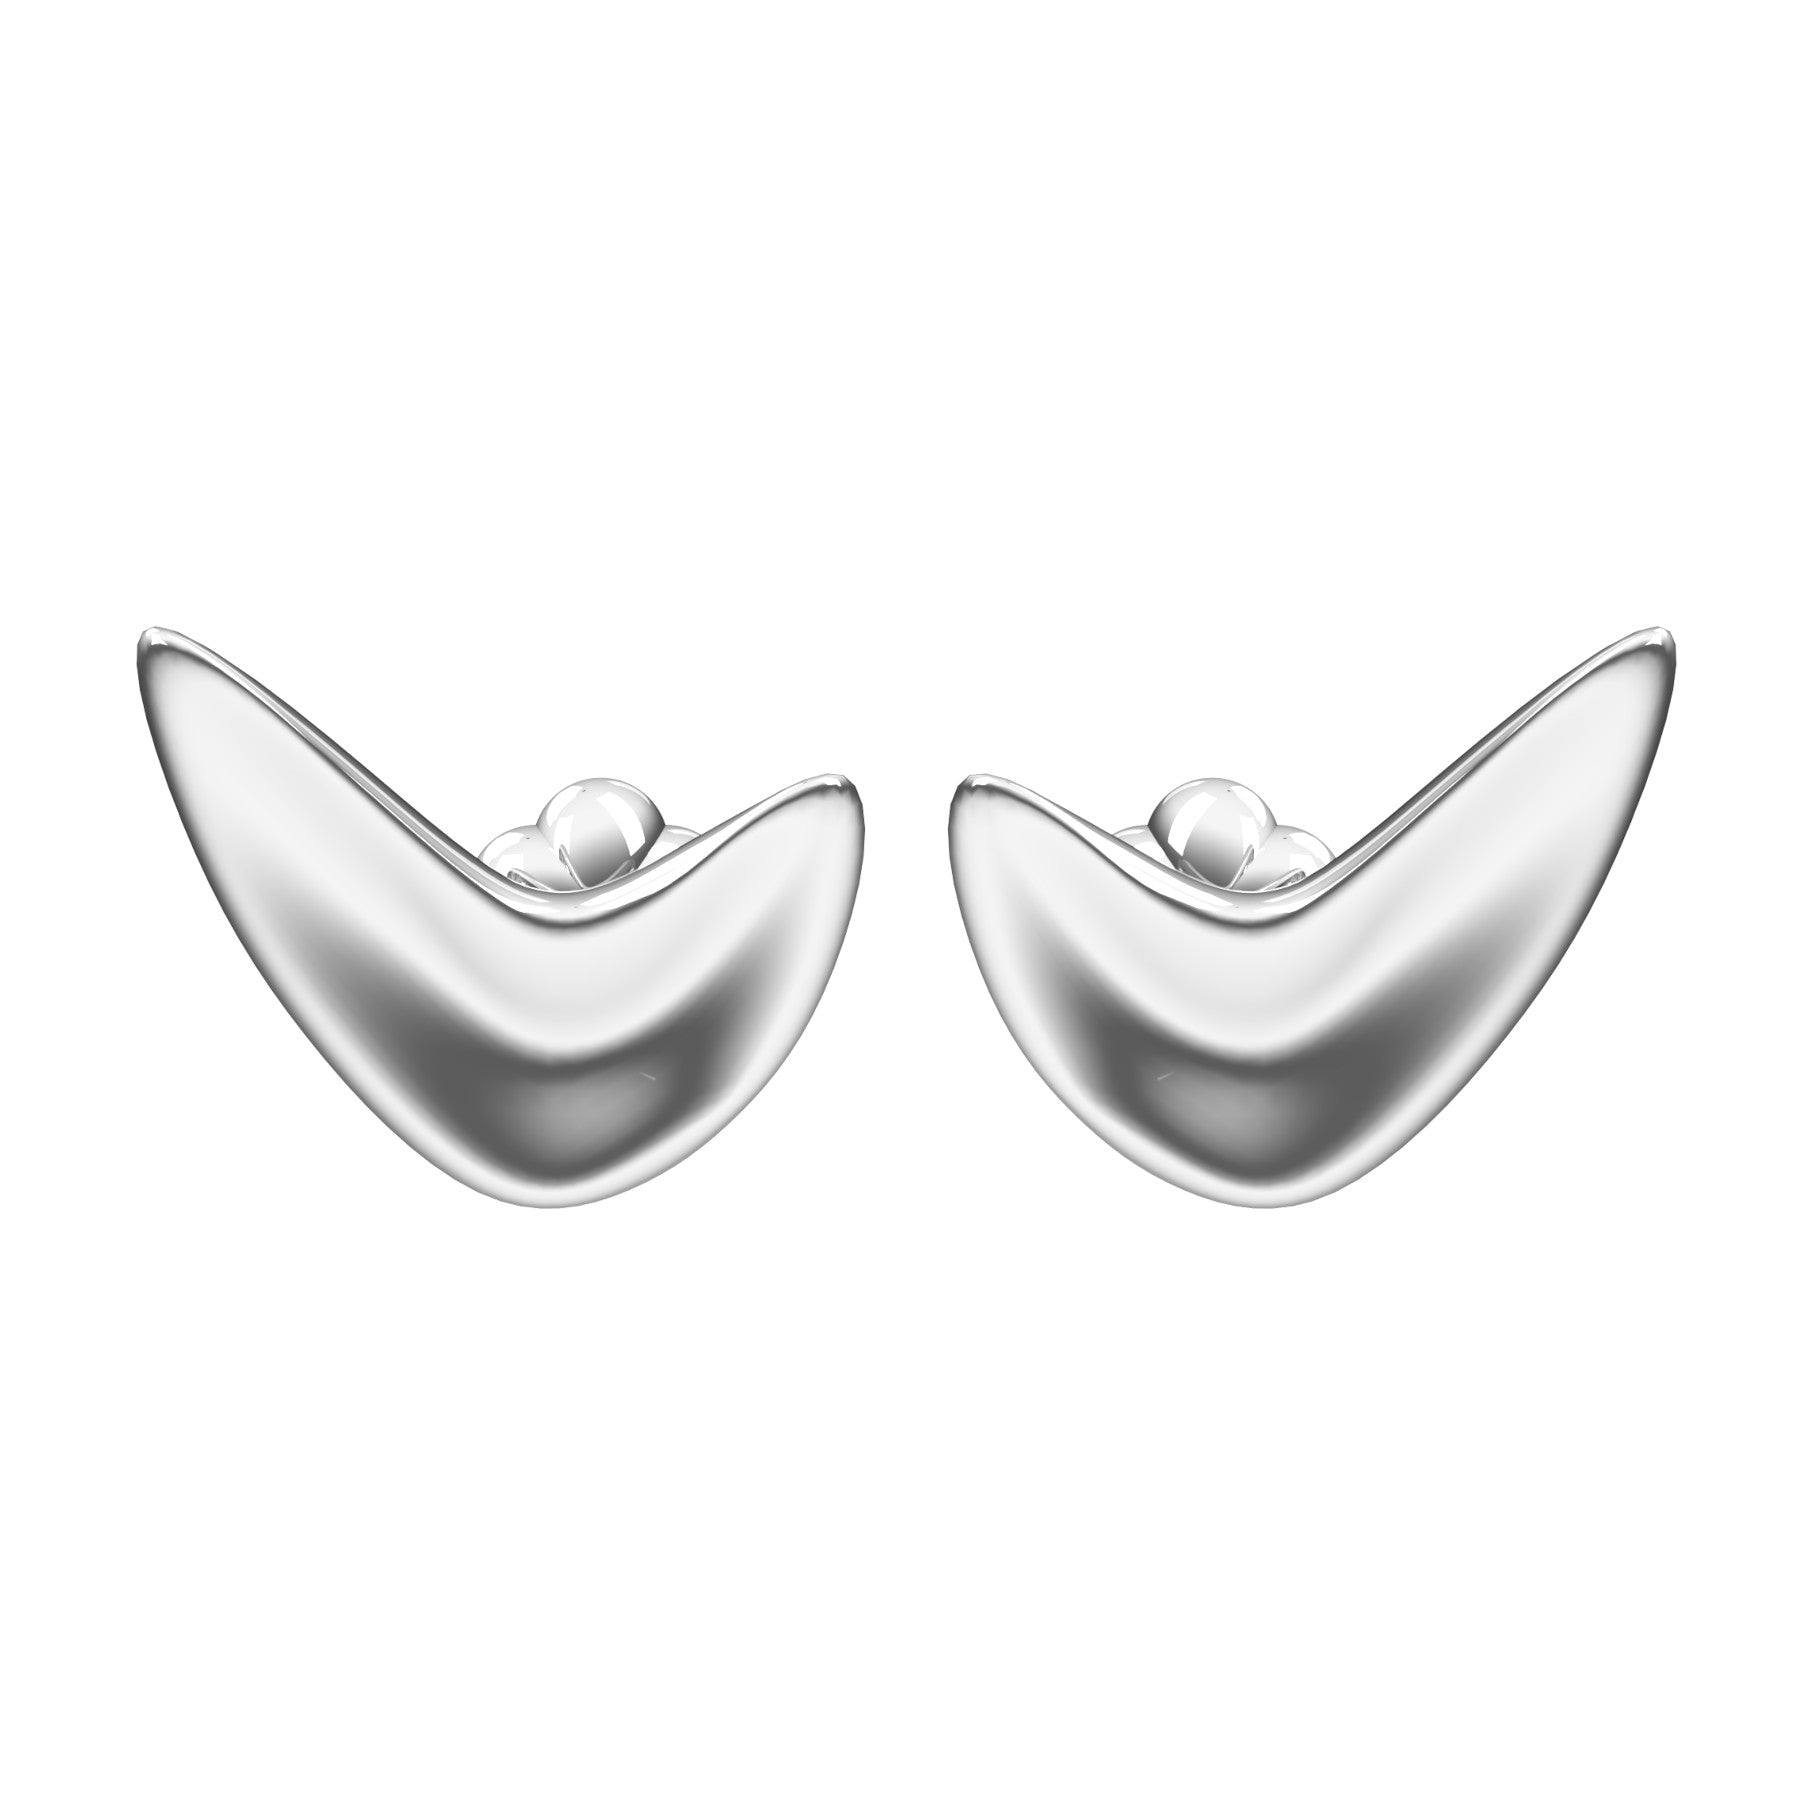 lobe earring, 18 K white gold, weight about 11,2 g. (0.40 oz) size 23x19x6 mm